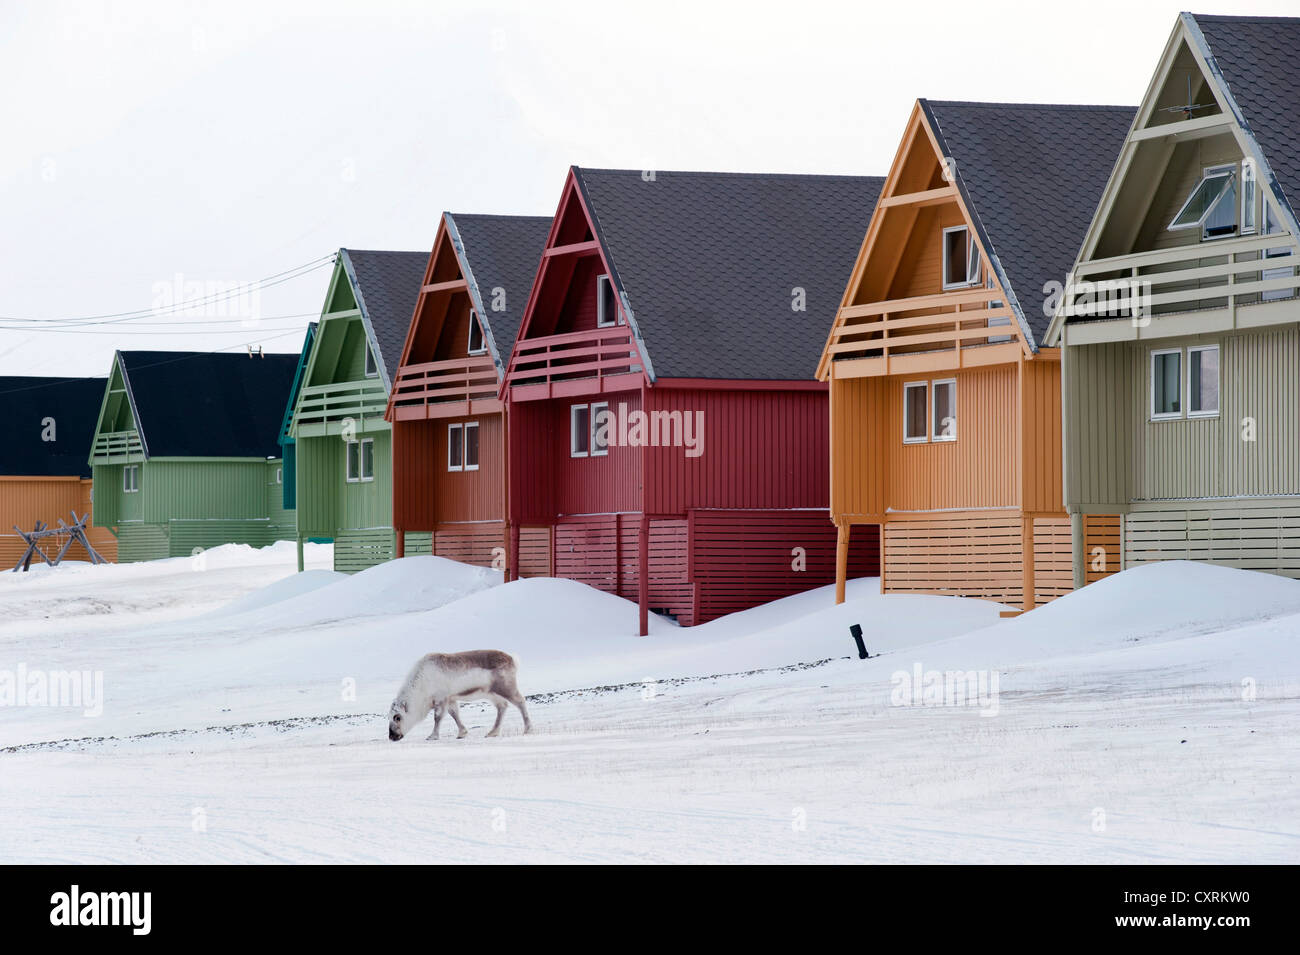 Svalbard Reindeer (Rangifer tarandus platyrhynchus) foraging for food in the snow in front of a row of colourful houses in the Stock Photo